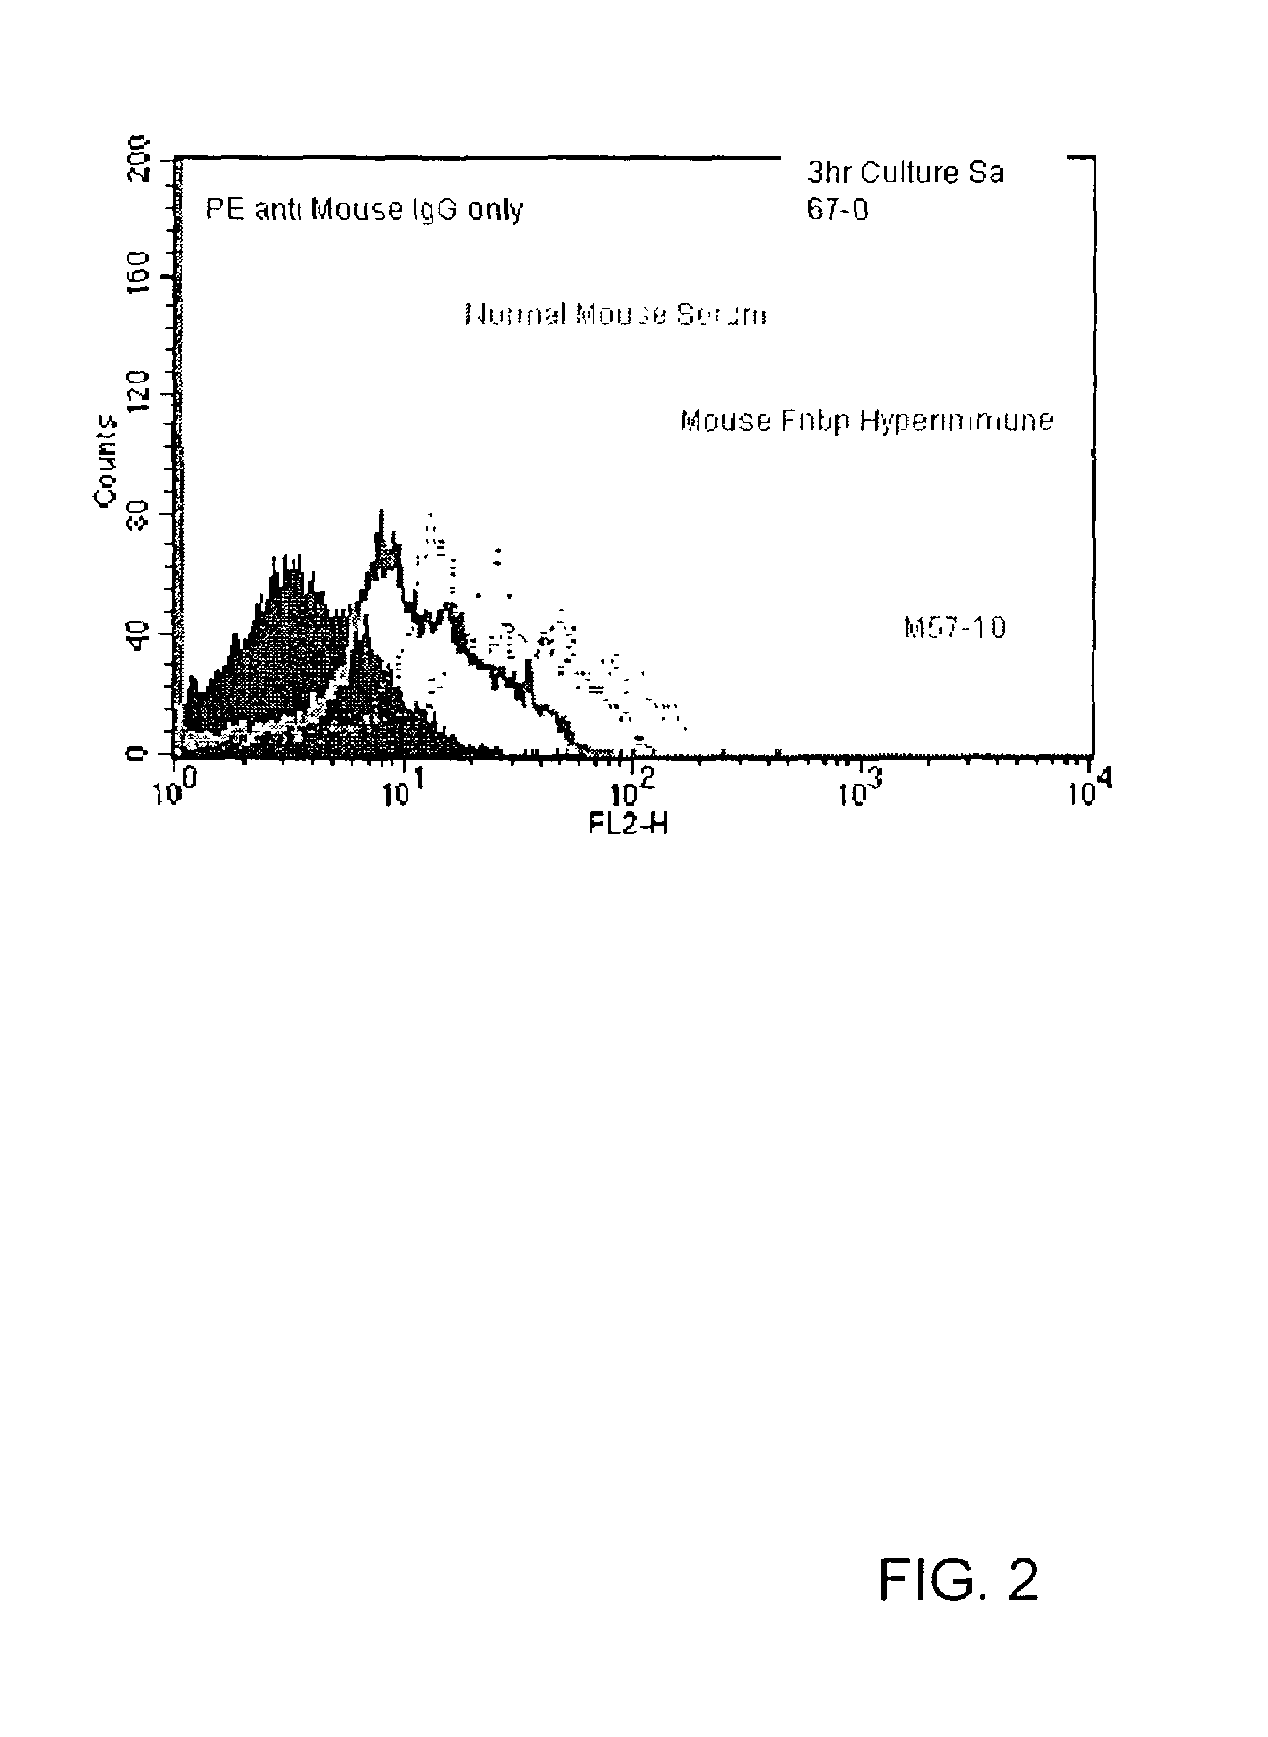 Monoclonal antibodies to the fibronectin binding protein and method of use in treating or preventing infections